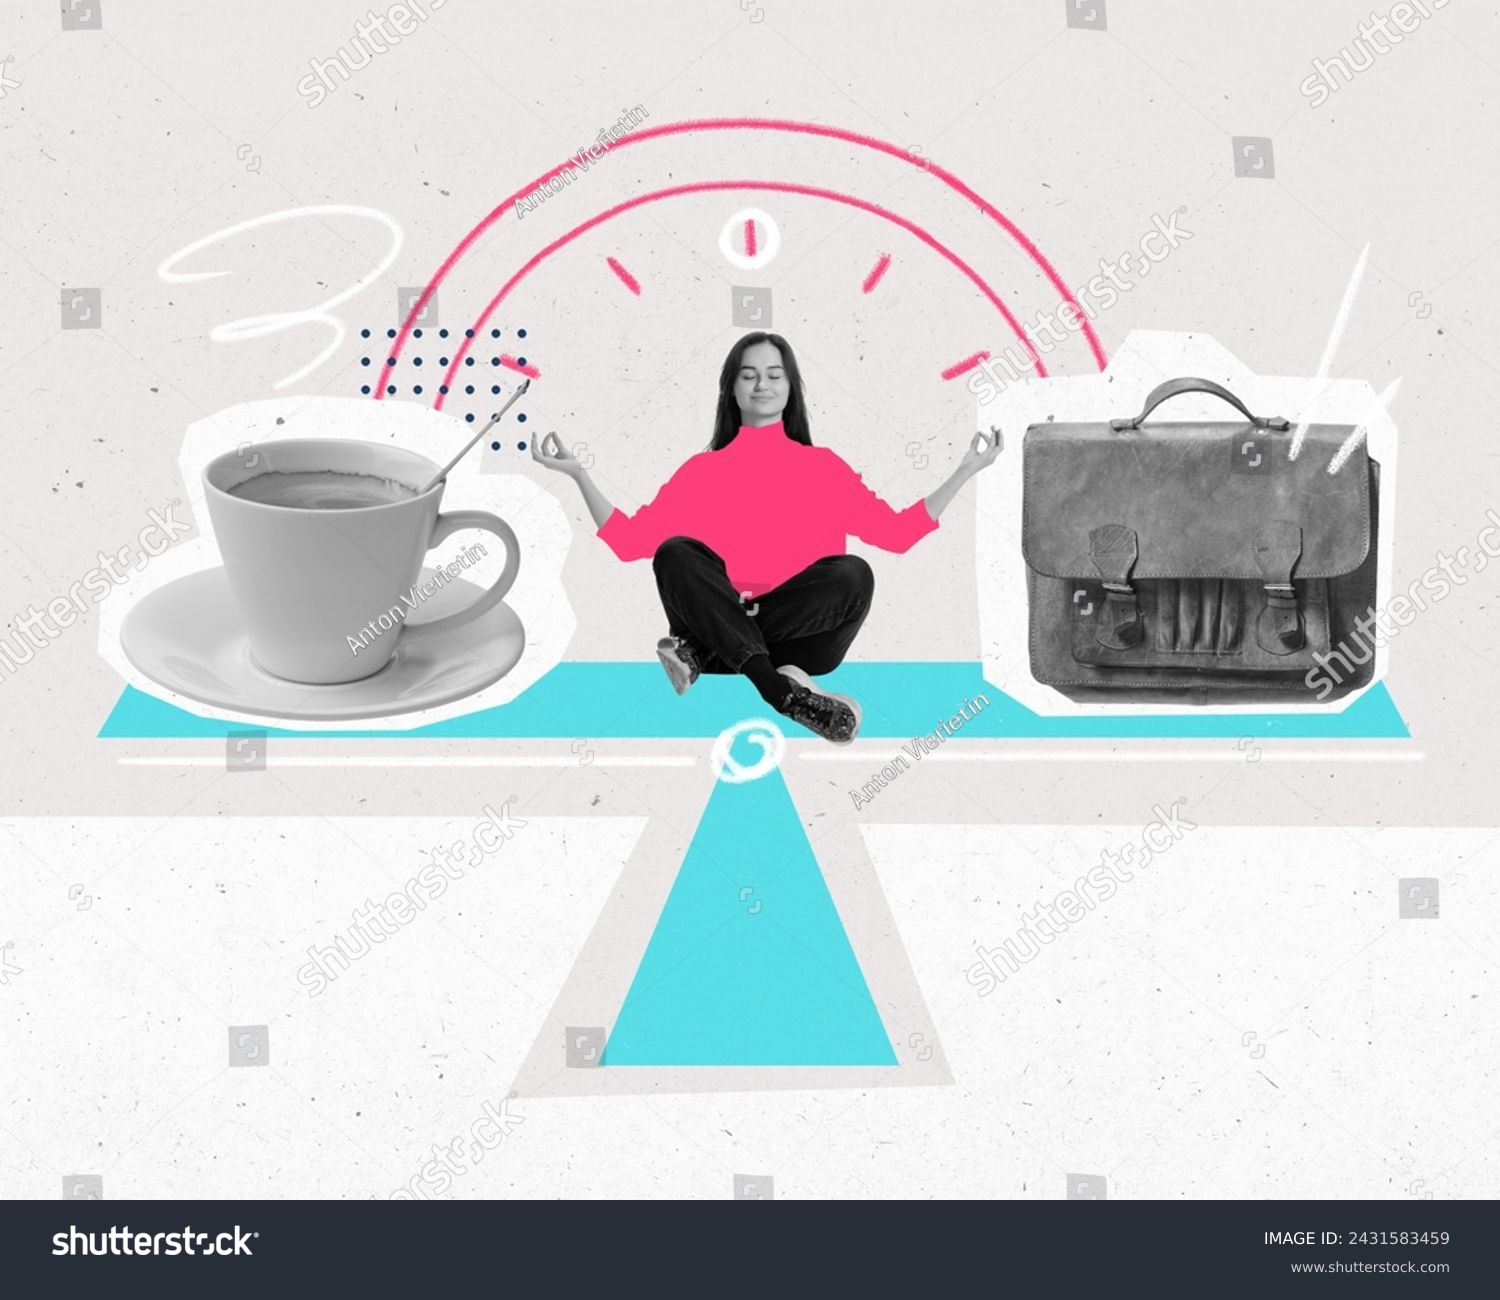 Poster. Modern aesthetic artwork. Woman meditating sitting on scales with cup of coffee and bag with dial on background. Concept of work and personal life balance, time management, career. #2431583459